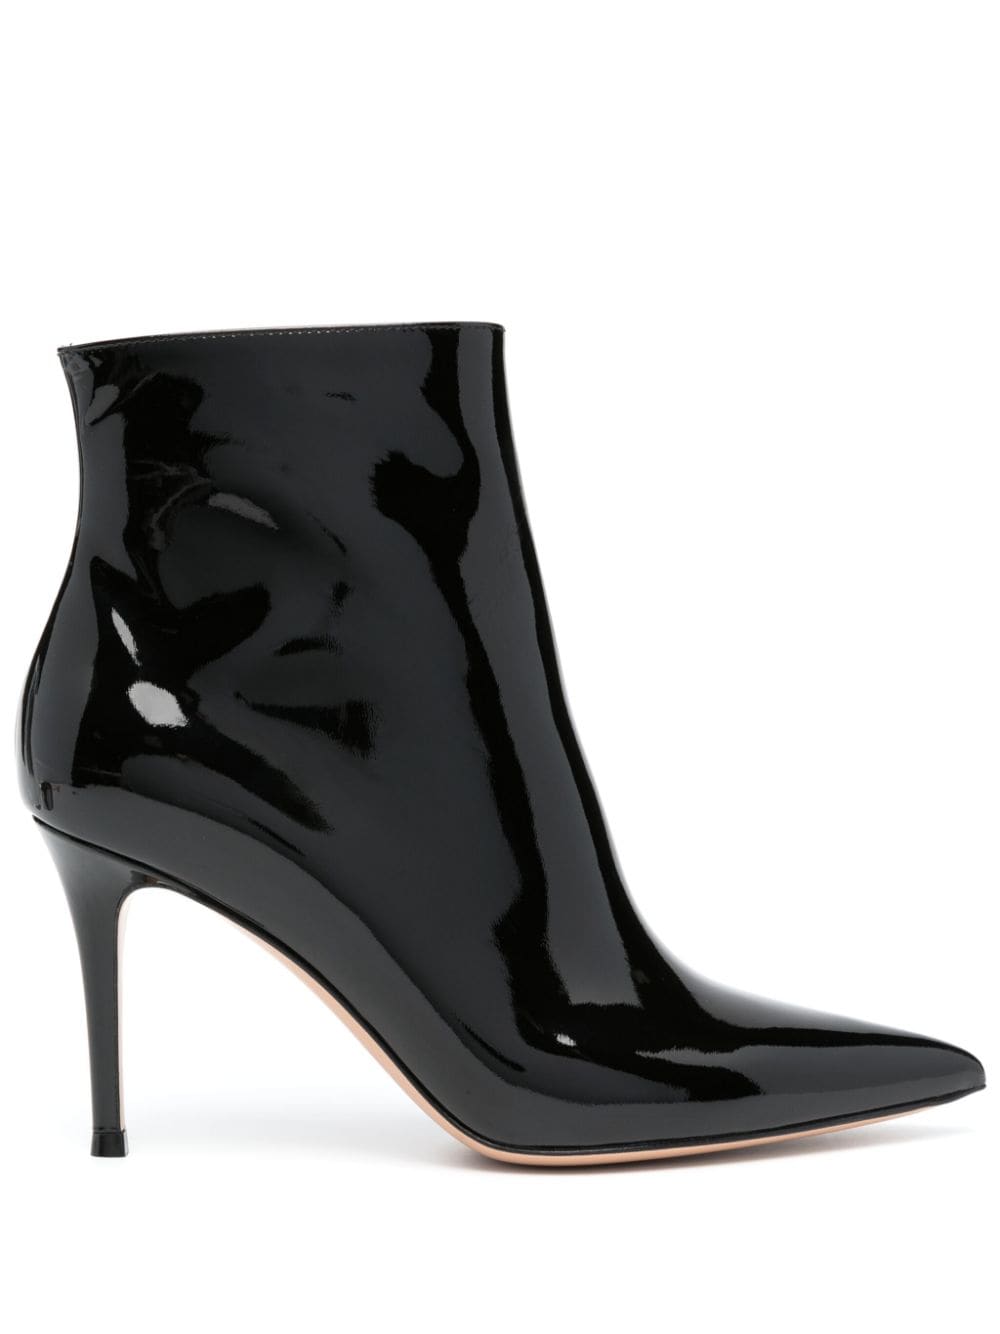 Image 1 of Gianvito Rossi 90mm leather ankle boots